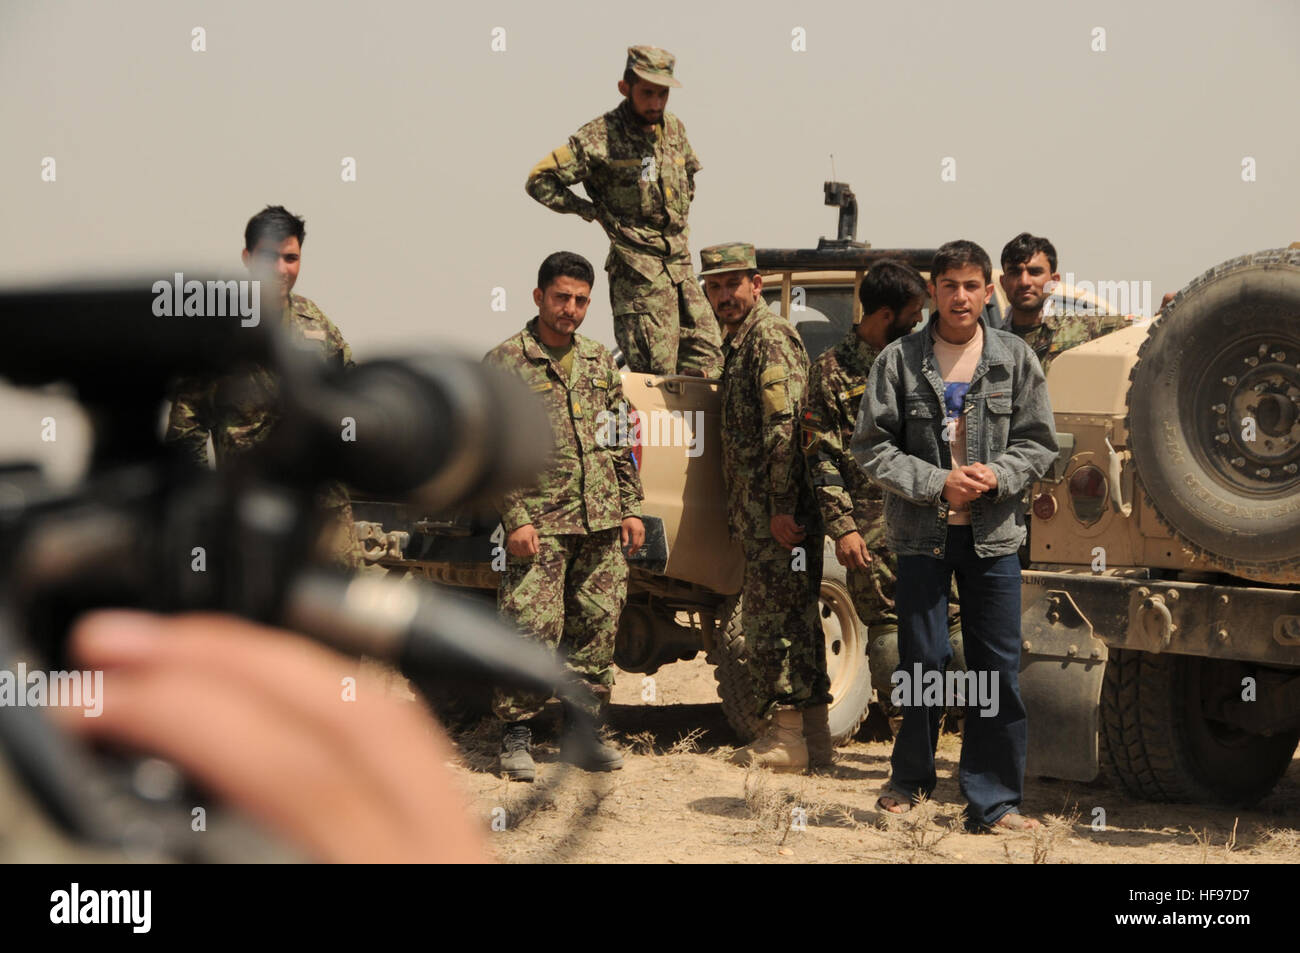 Darulaman, Afghanistan (September 2, 2010) – Sayed Reza Hosainy Adib from  narrates a spot for Noorin TV on a live fire evolution at the Infantry  Branch School in Darulaman. The school teaches